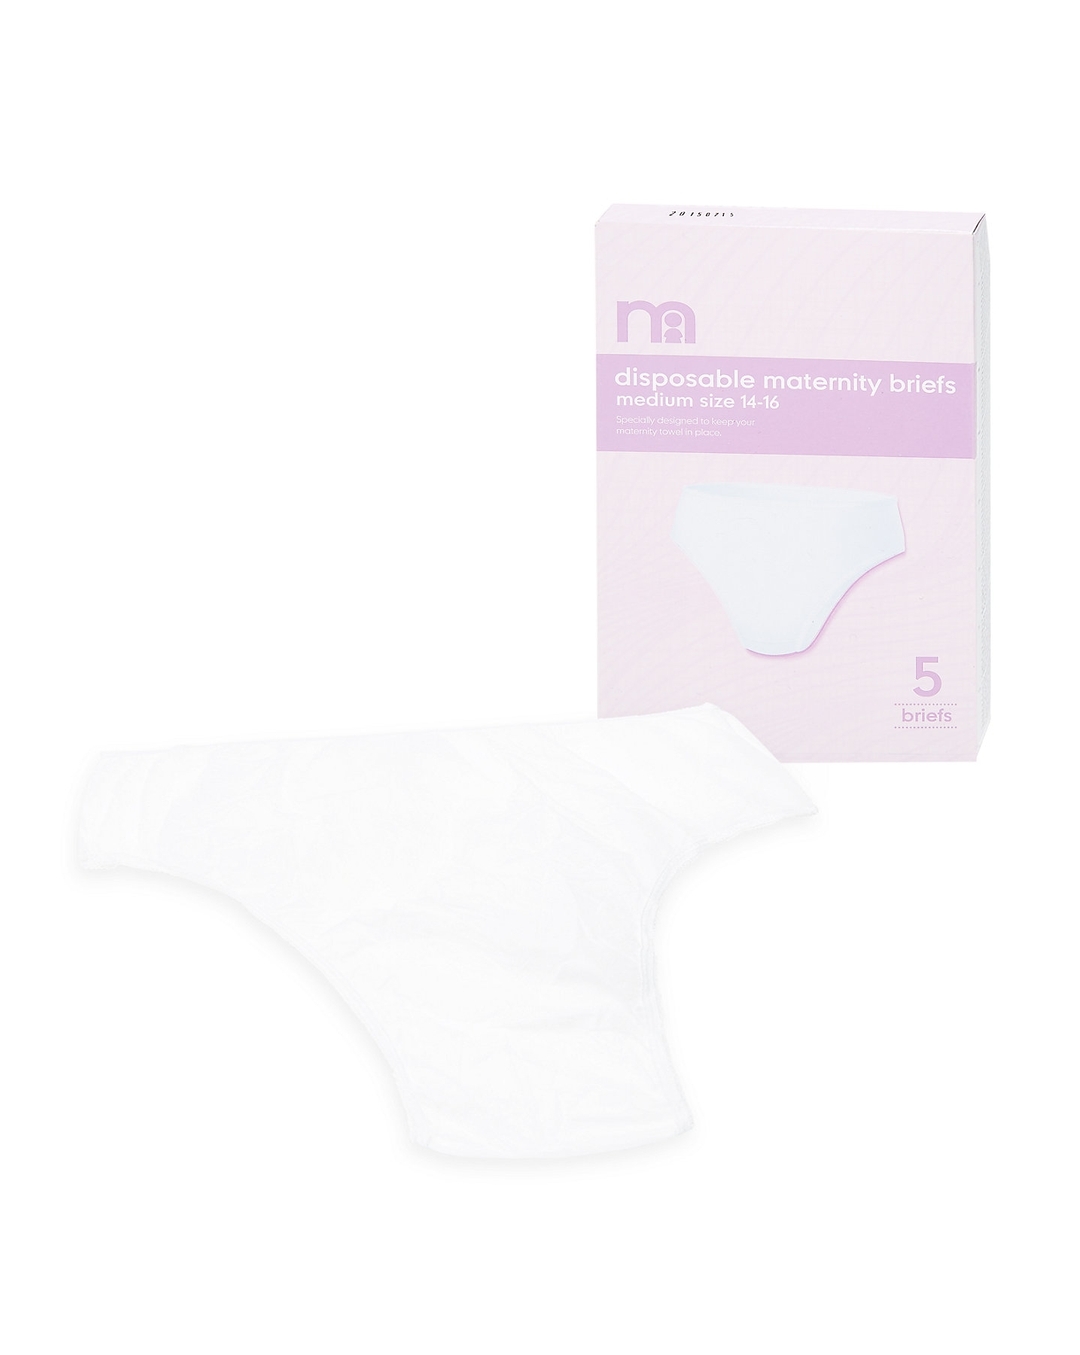 INCARE Cotton Hosiery MATERNITY PANTY at Rs 110/per pc in Mumbai